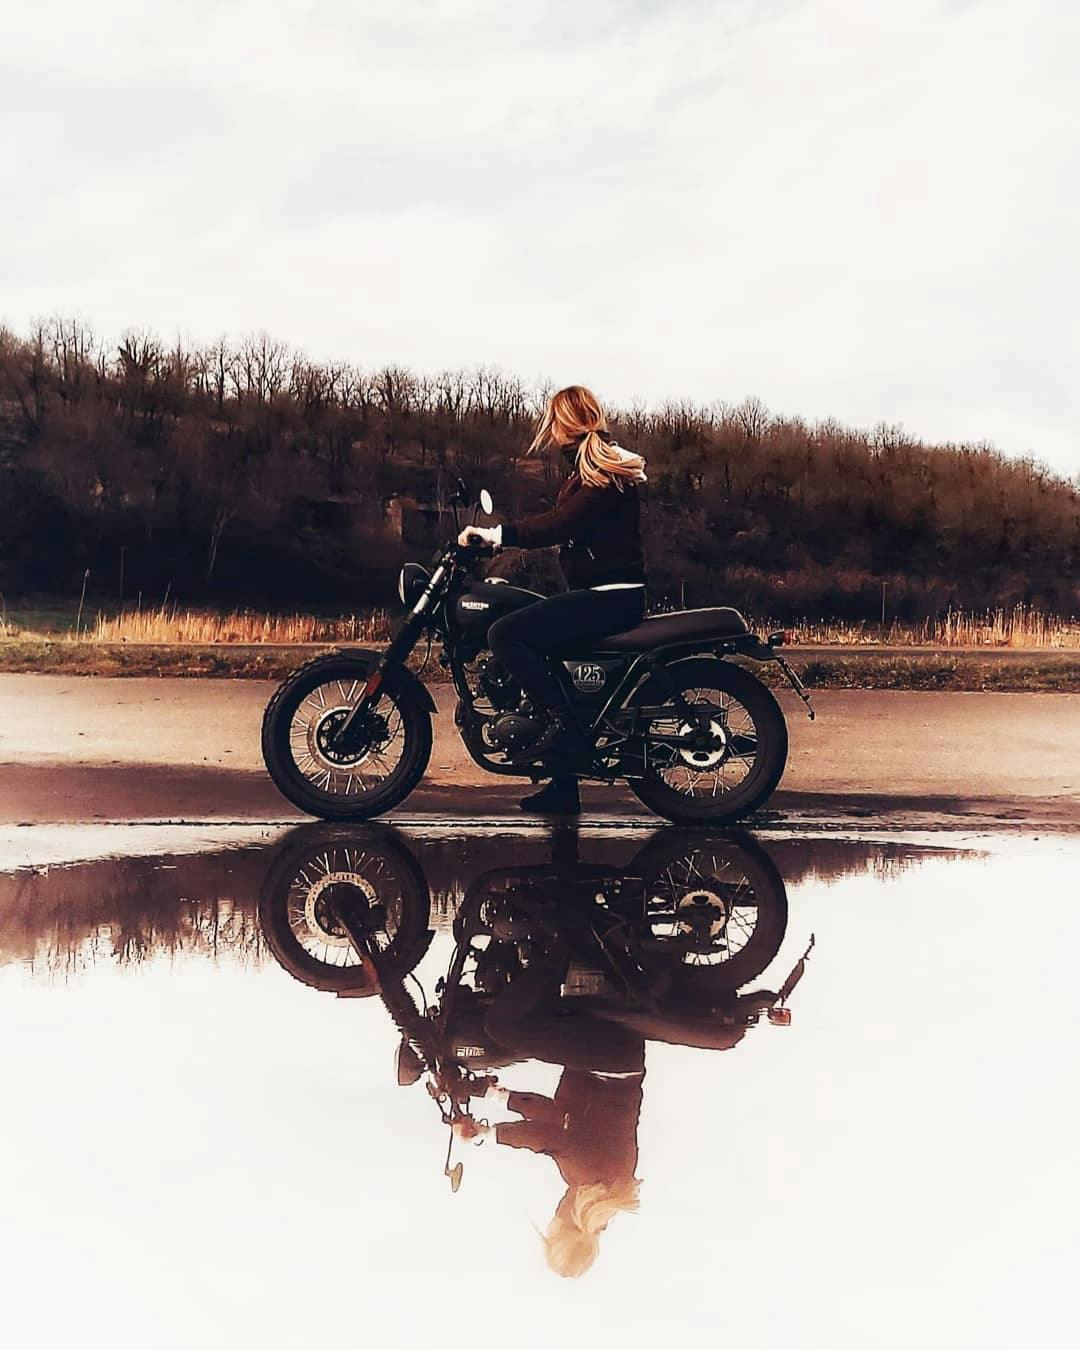 Rider of the Month Joss on her Cromwell 125 in Backstage Black that is mirrored in a puddle